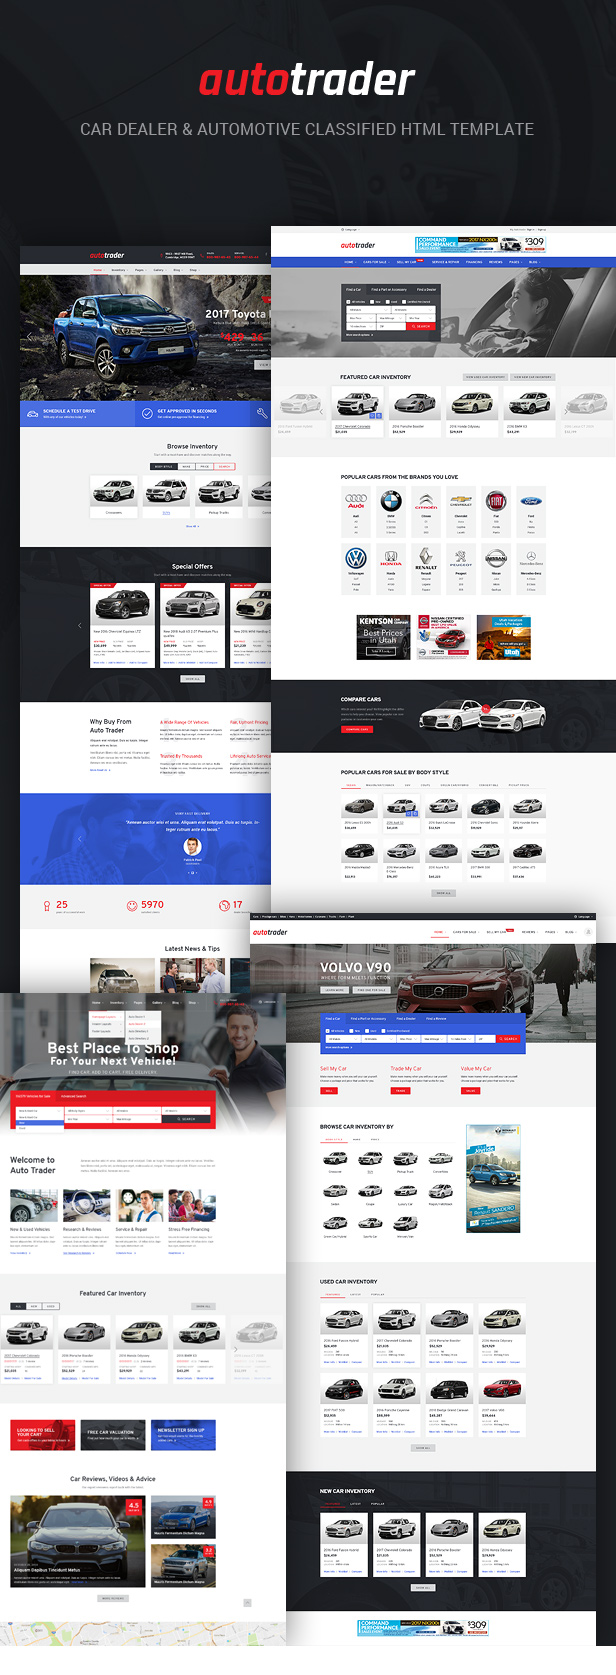 AutoTrader - Car Dealer and Automotive Classified HTML Template - 2